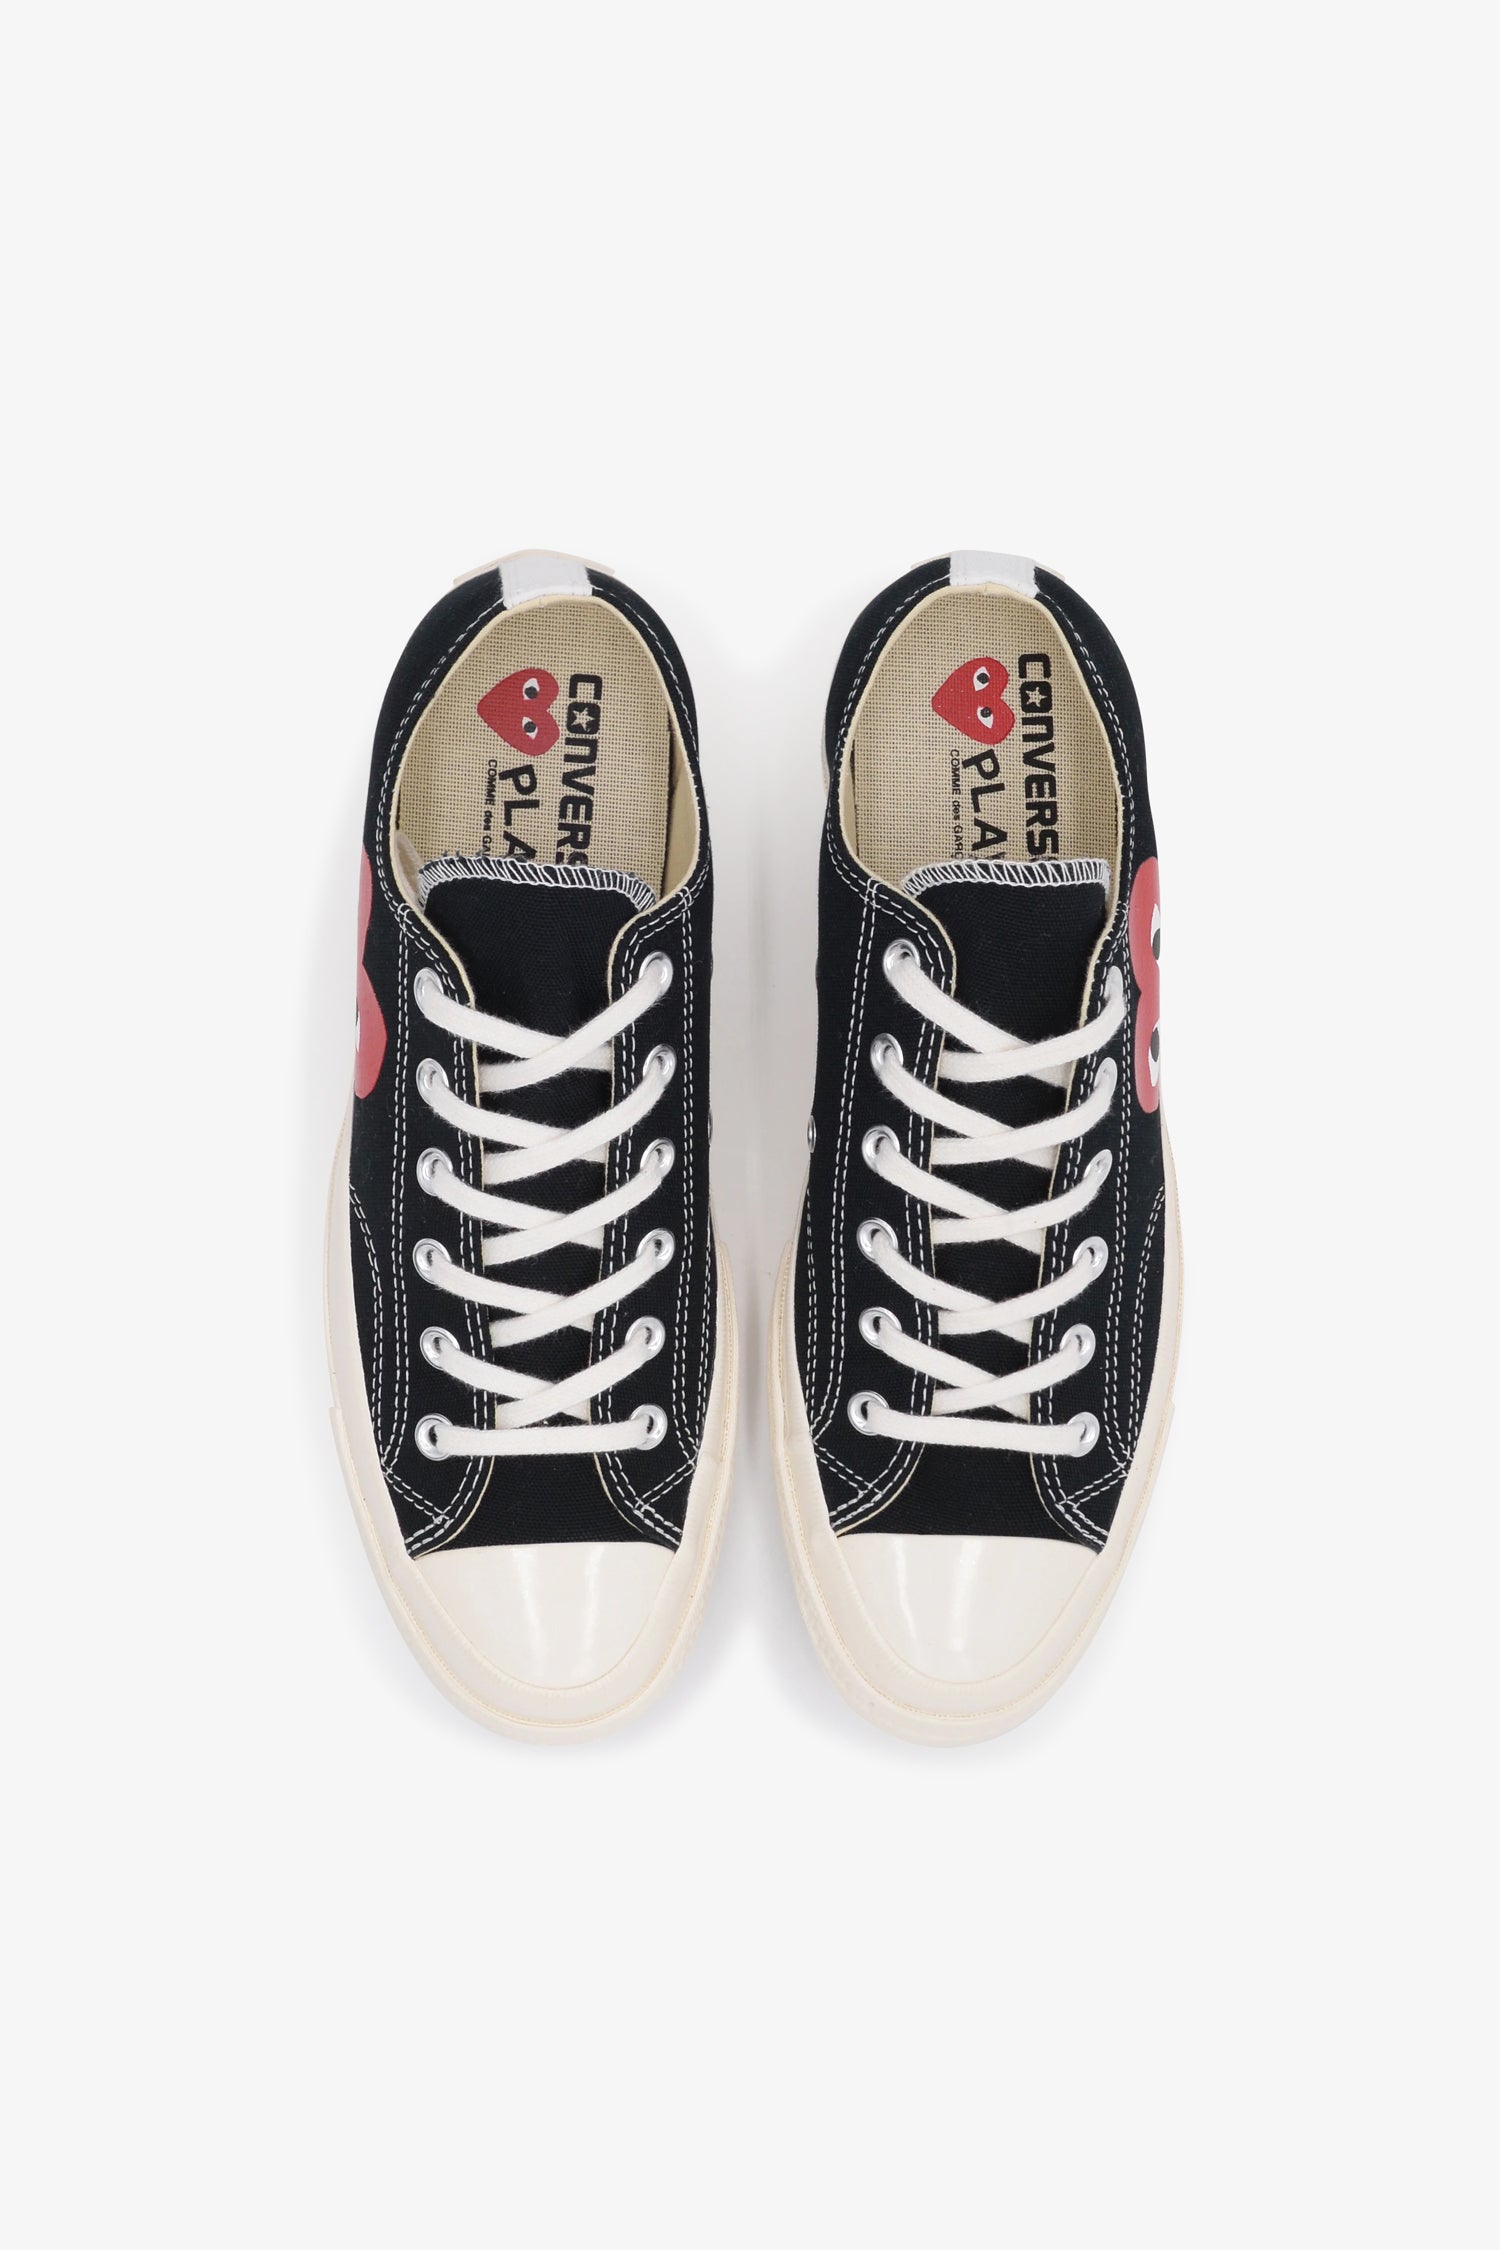 converse cdg for sale